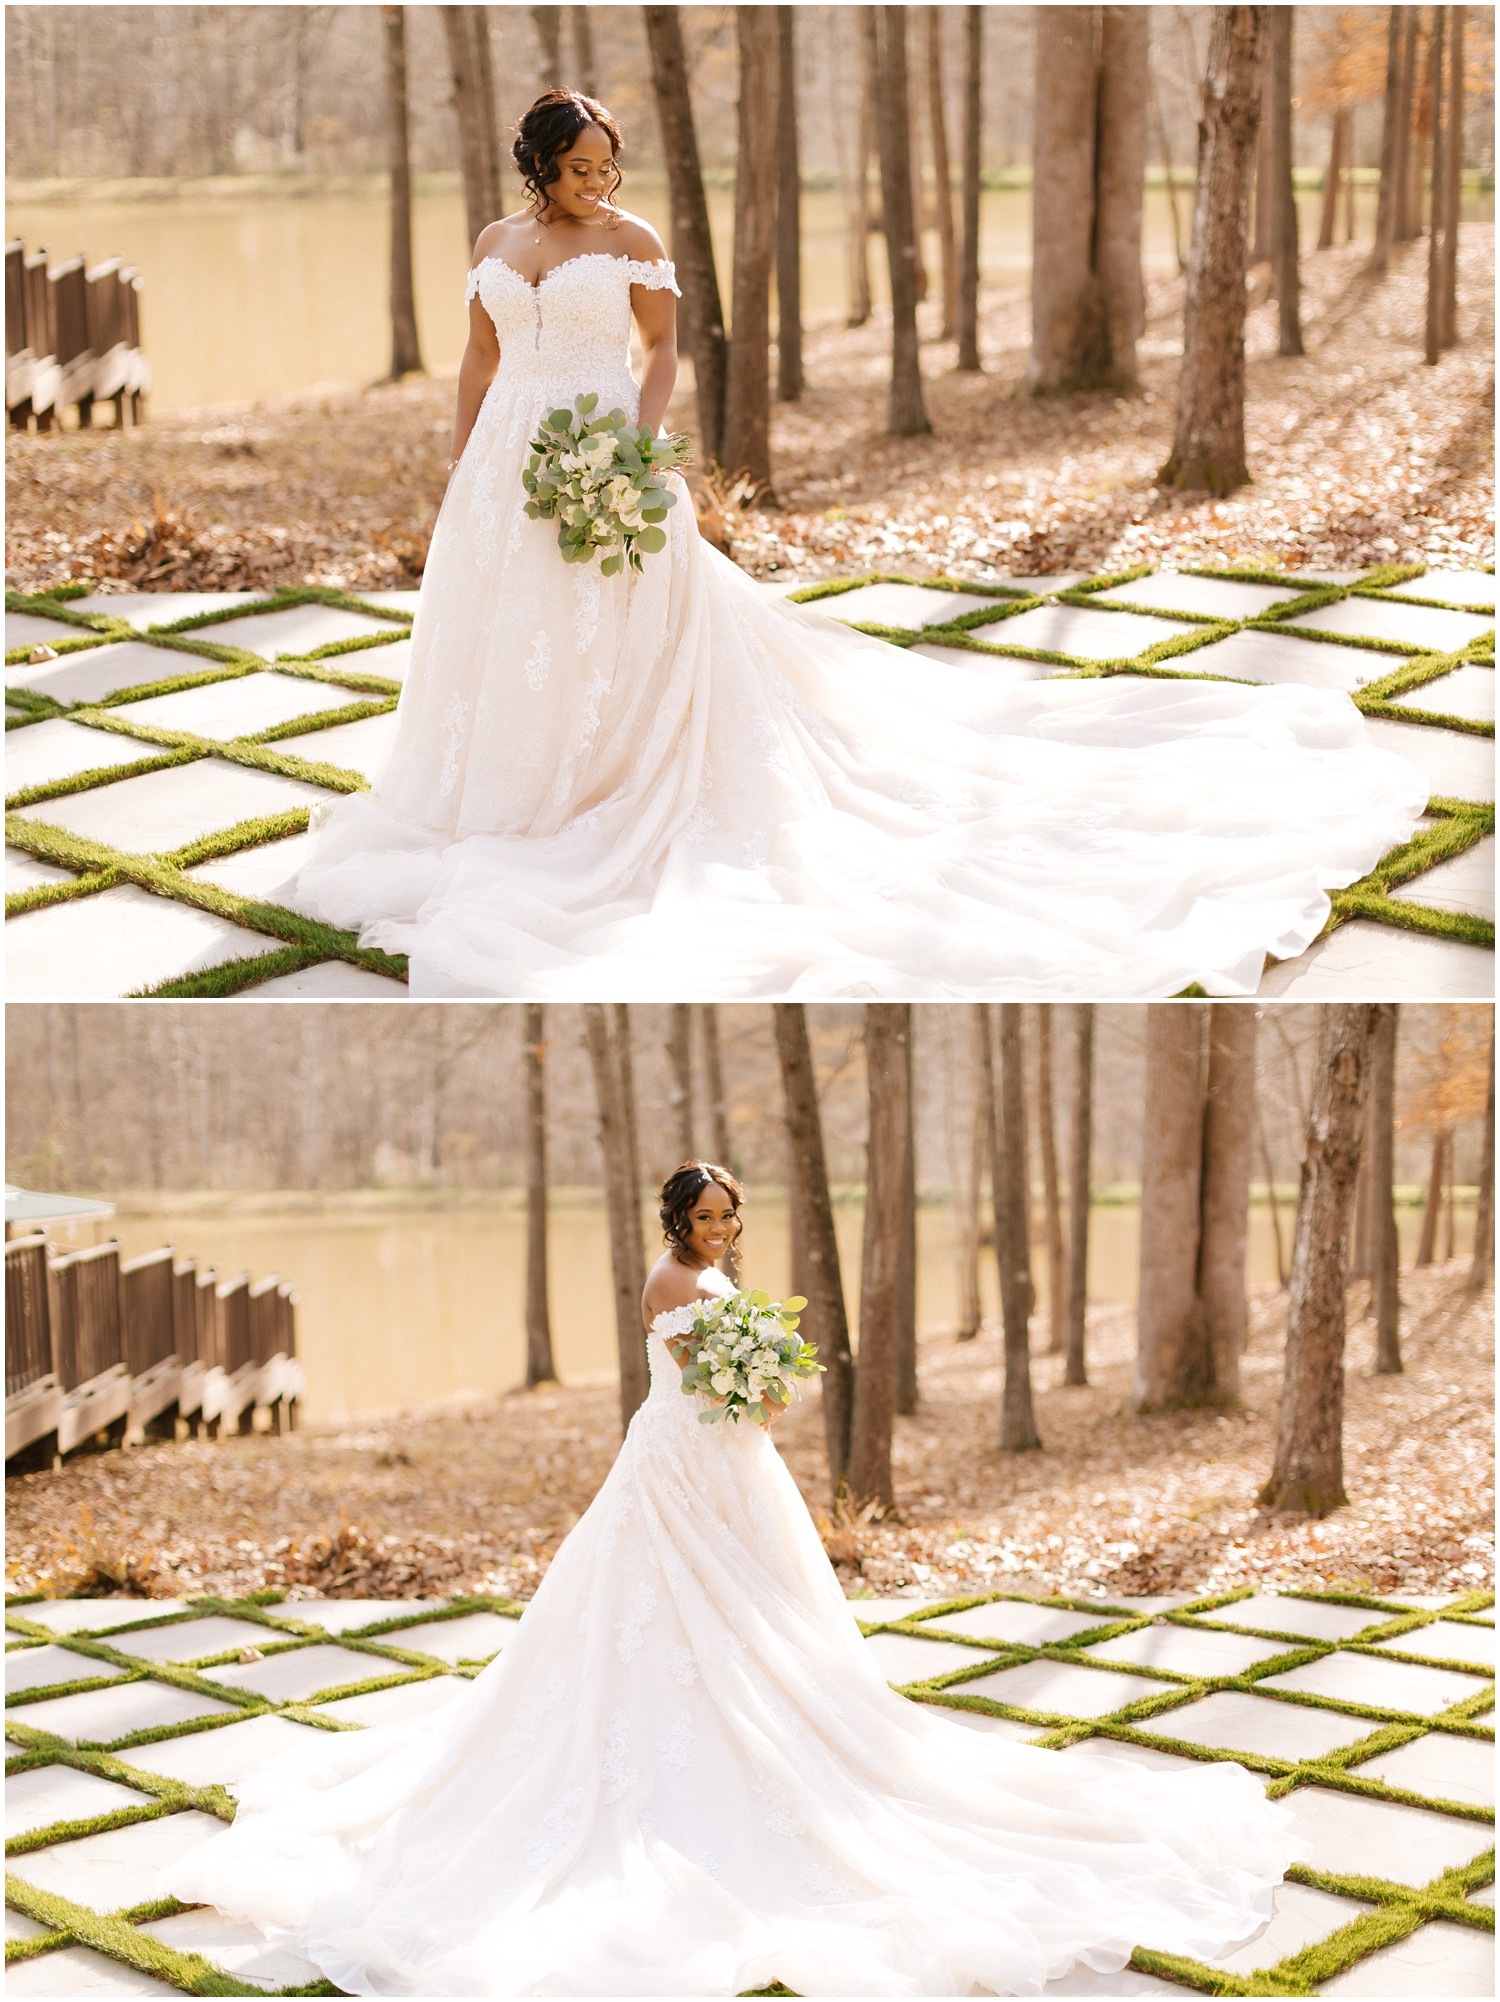 Bridal portraits in Raleigh, NC taken by photographer Chelsea Renay